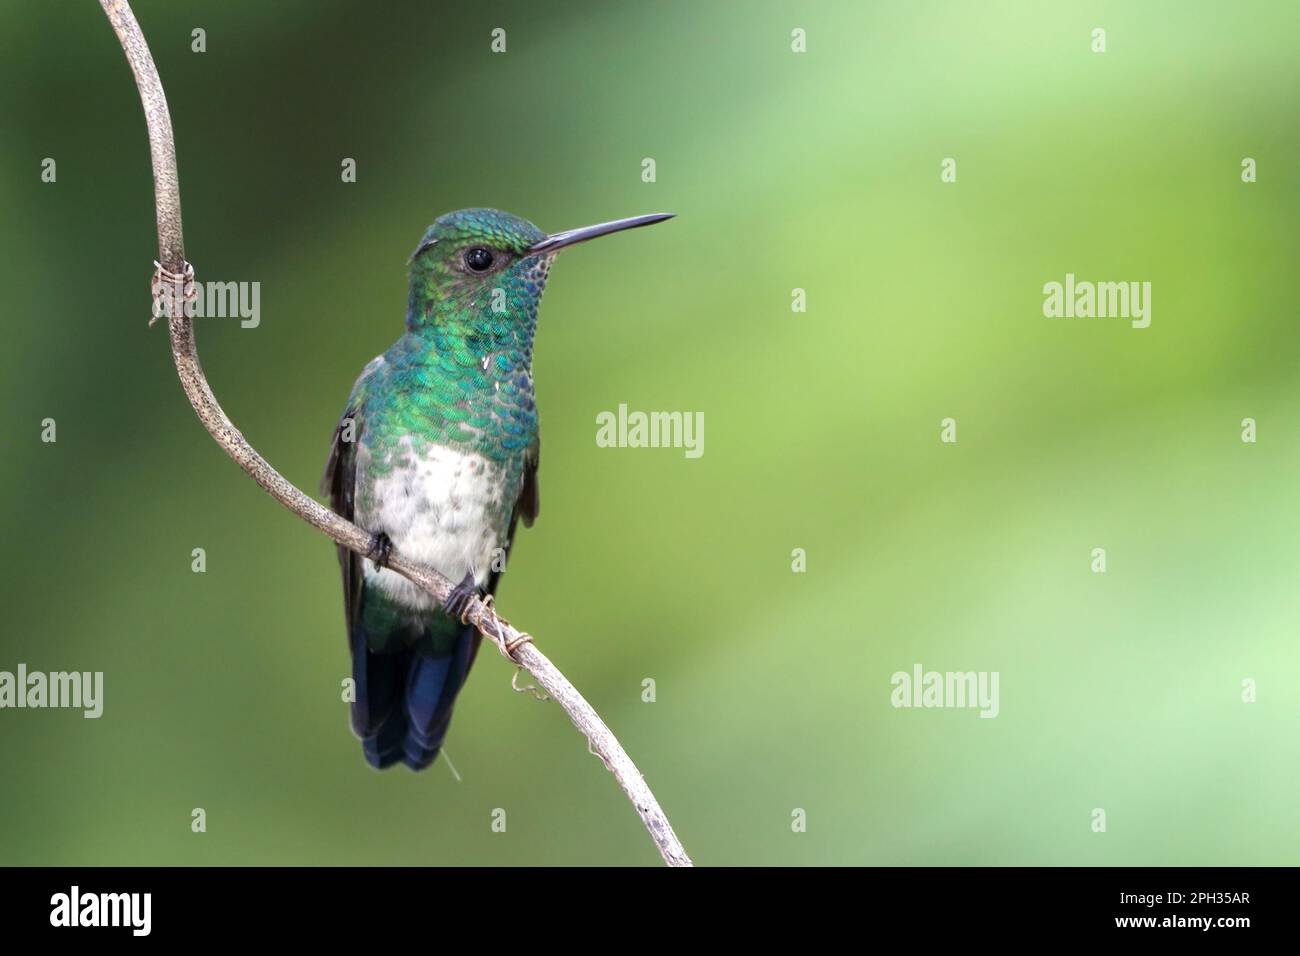 Blue-chinned Sapphire hummingbird (Chlorestes notata) perched on a branch over a green background Stock Photo